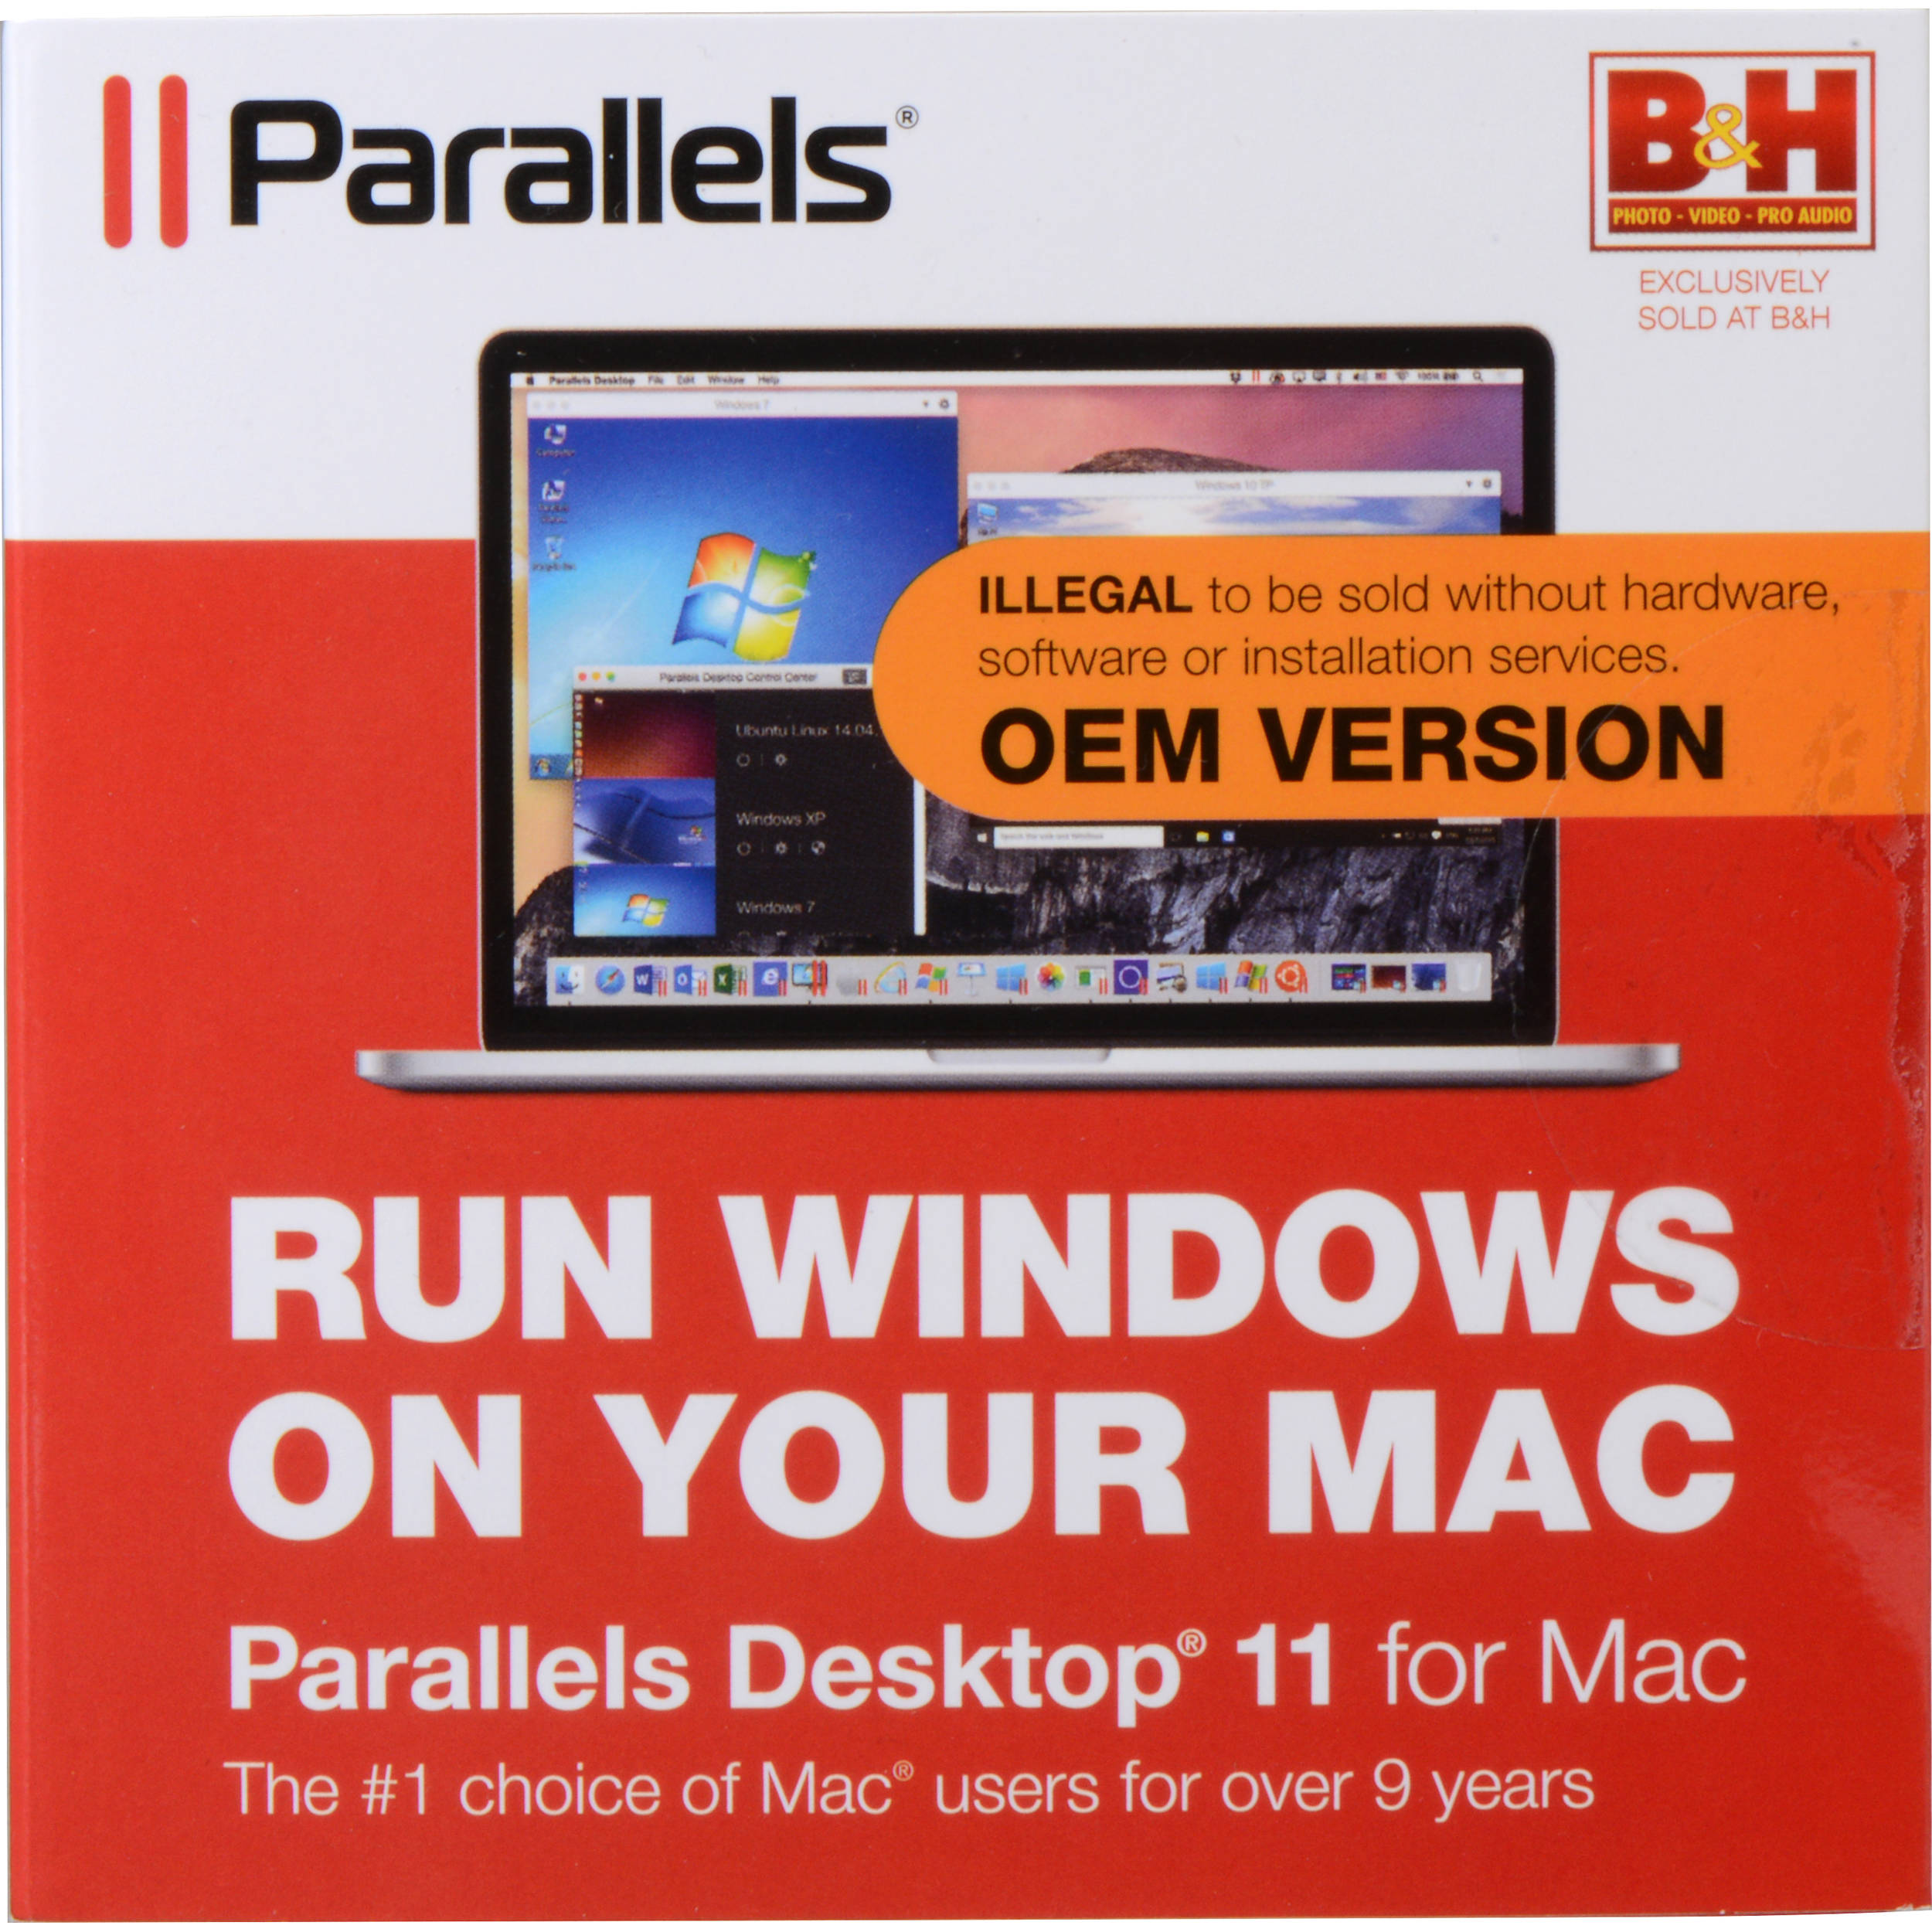 How To Install Parallels Desktop 11 For Mac